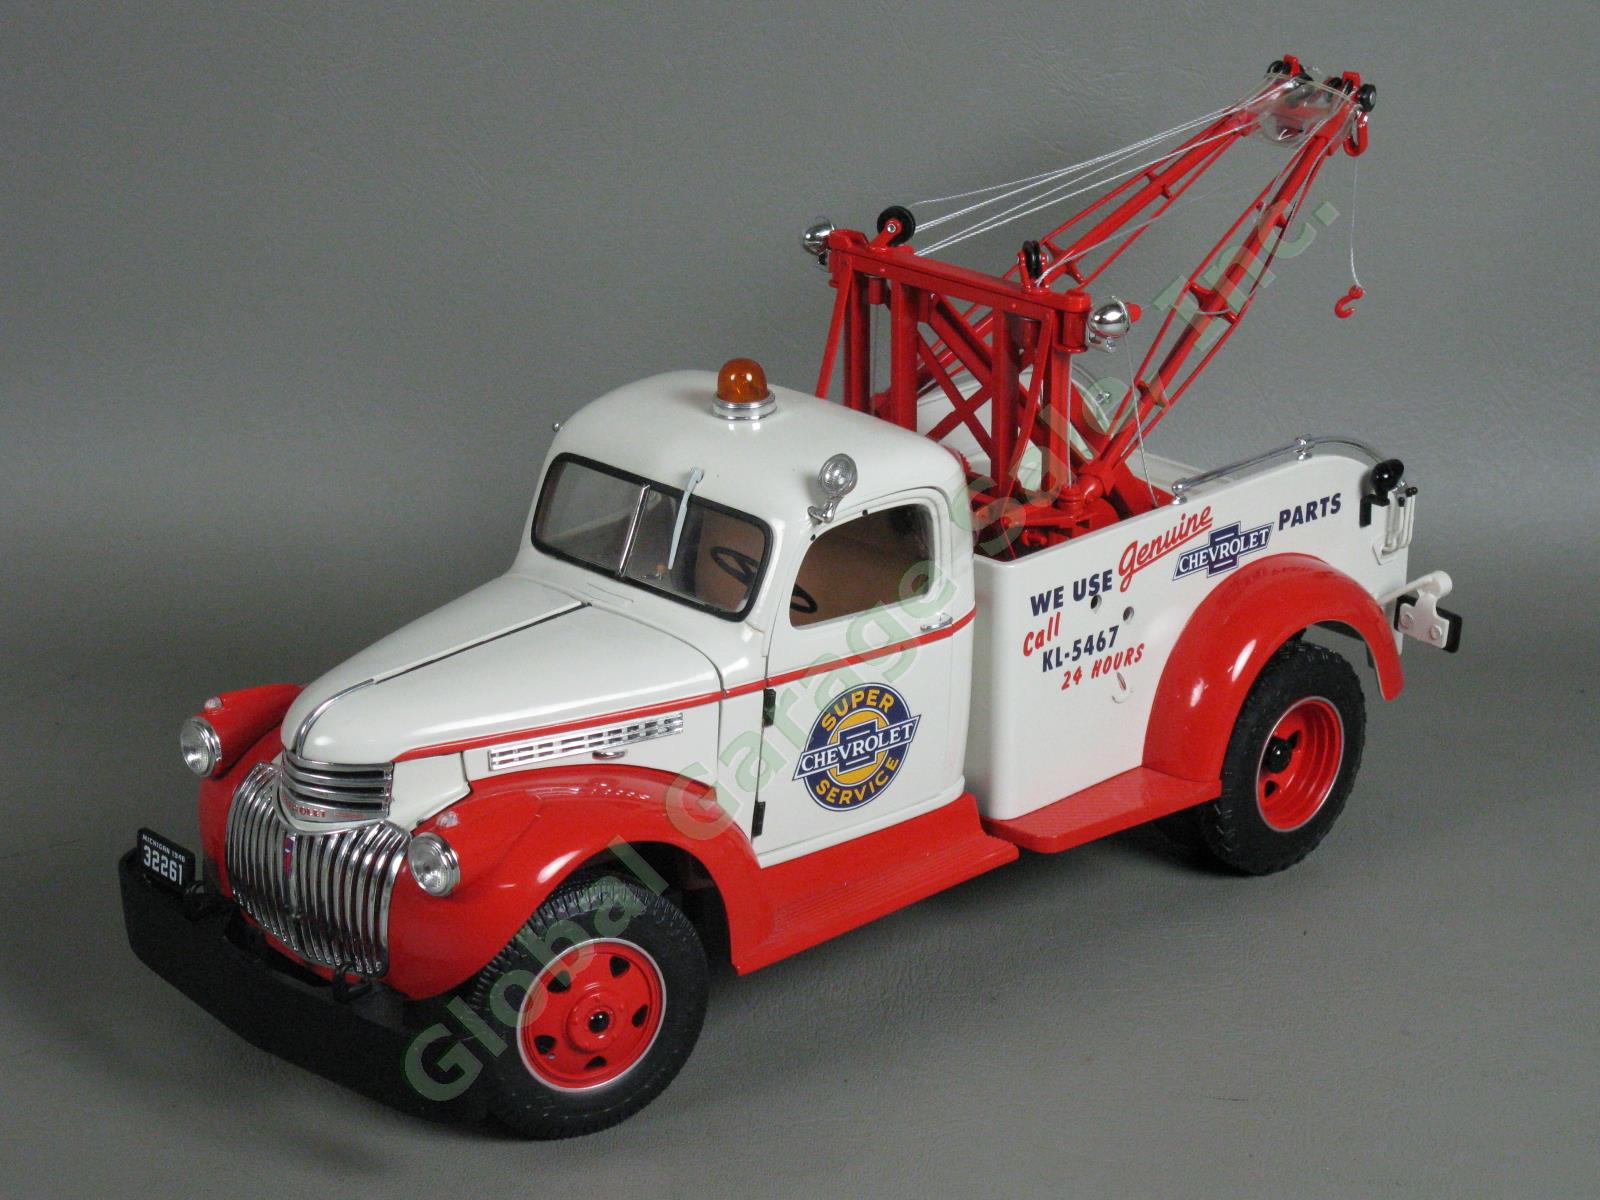 DCP Highway 61 1946 Chevrolet Tow Truck Car Diecast Promotion R/Wh 1:16 Scale NR